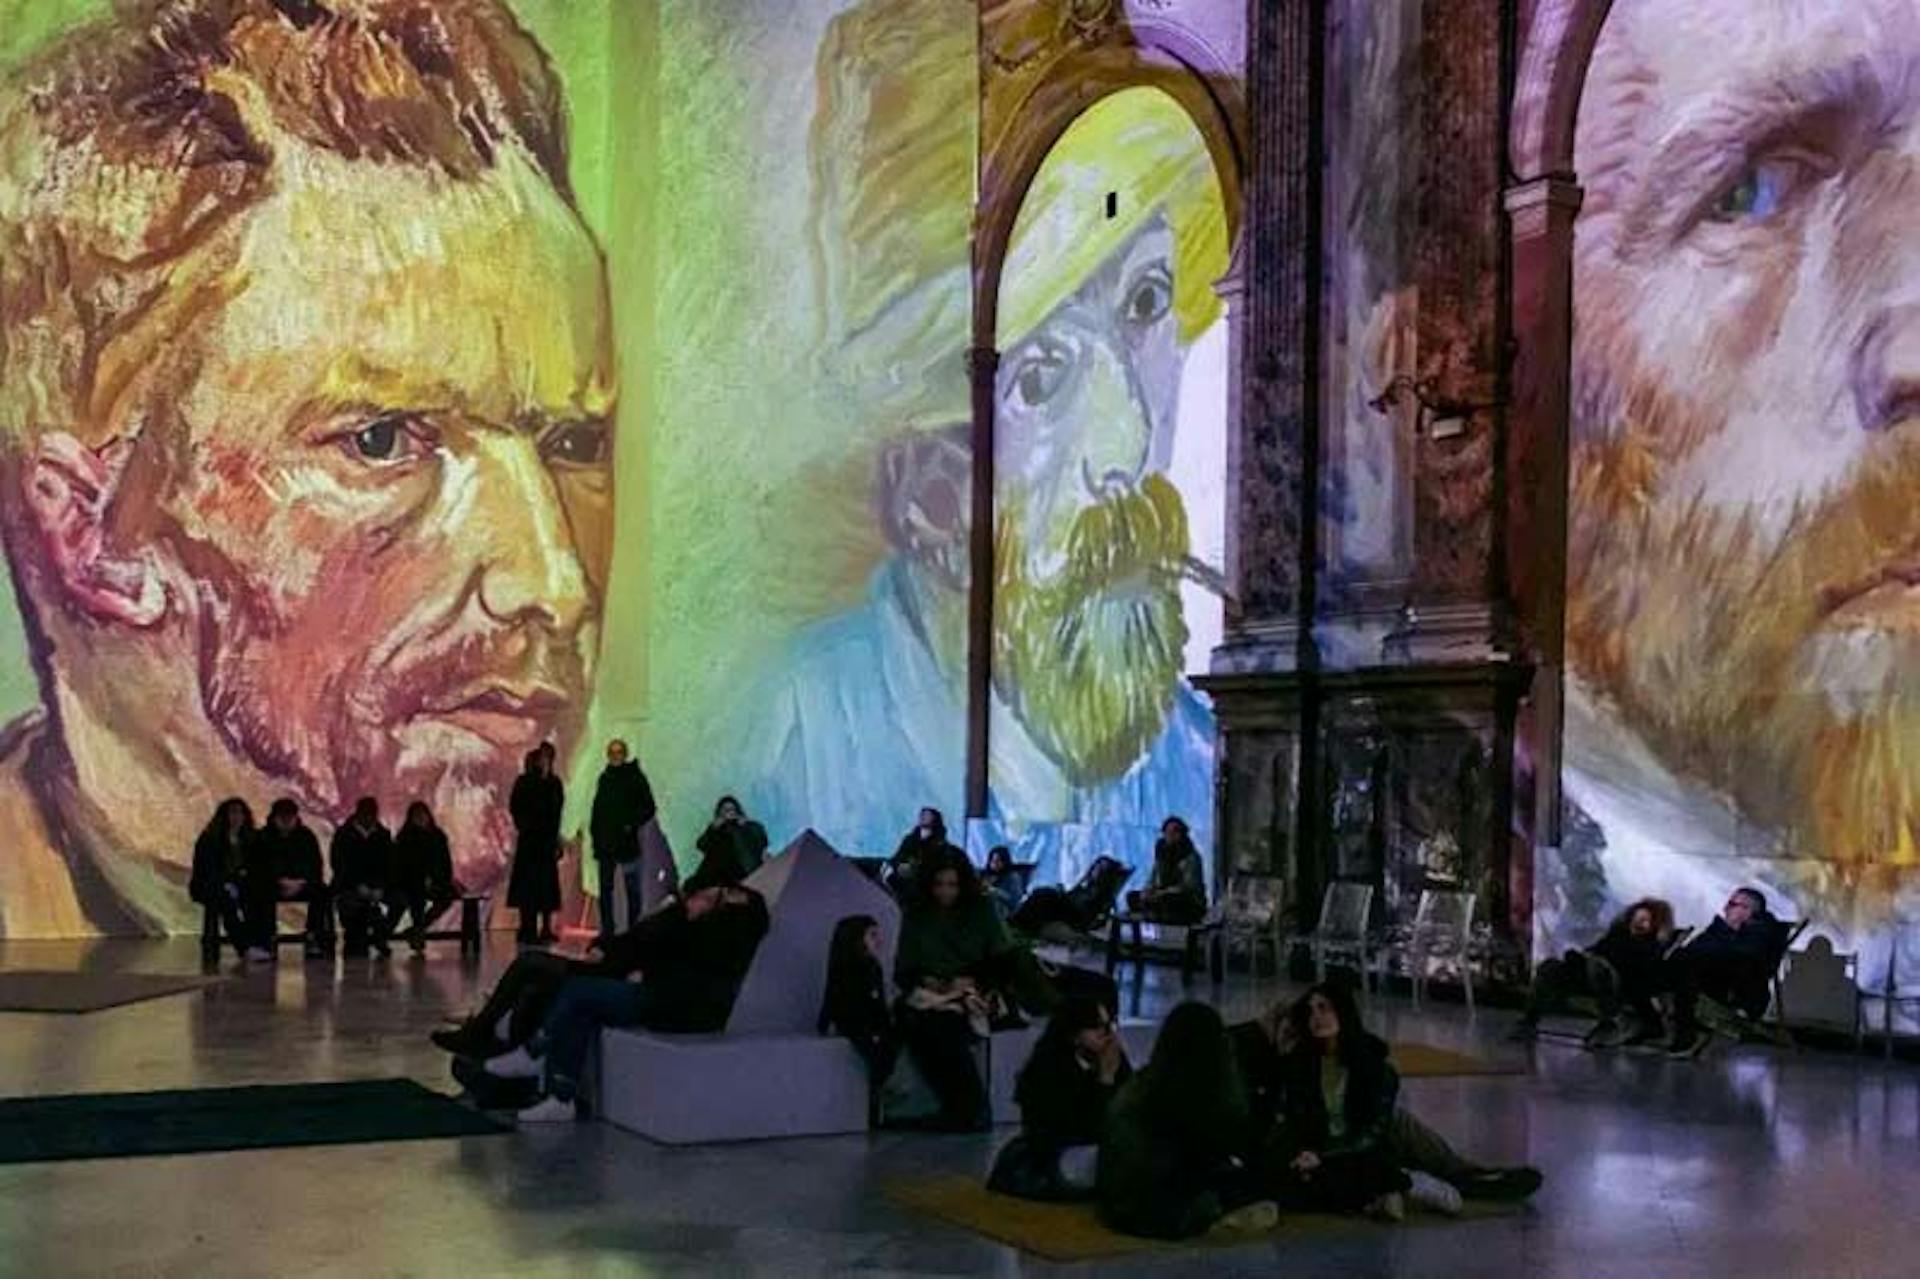 You find yourself surrounded by larger-than-life renditions of Van Gogh's most famous works 